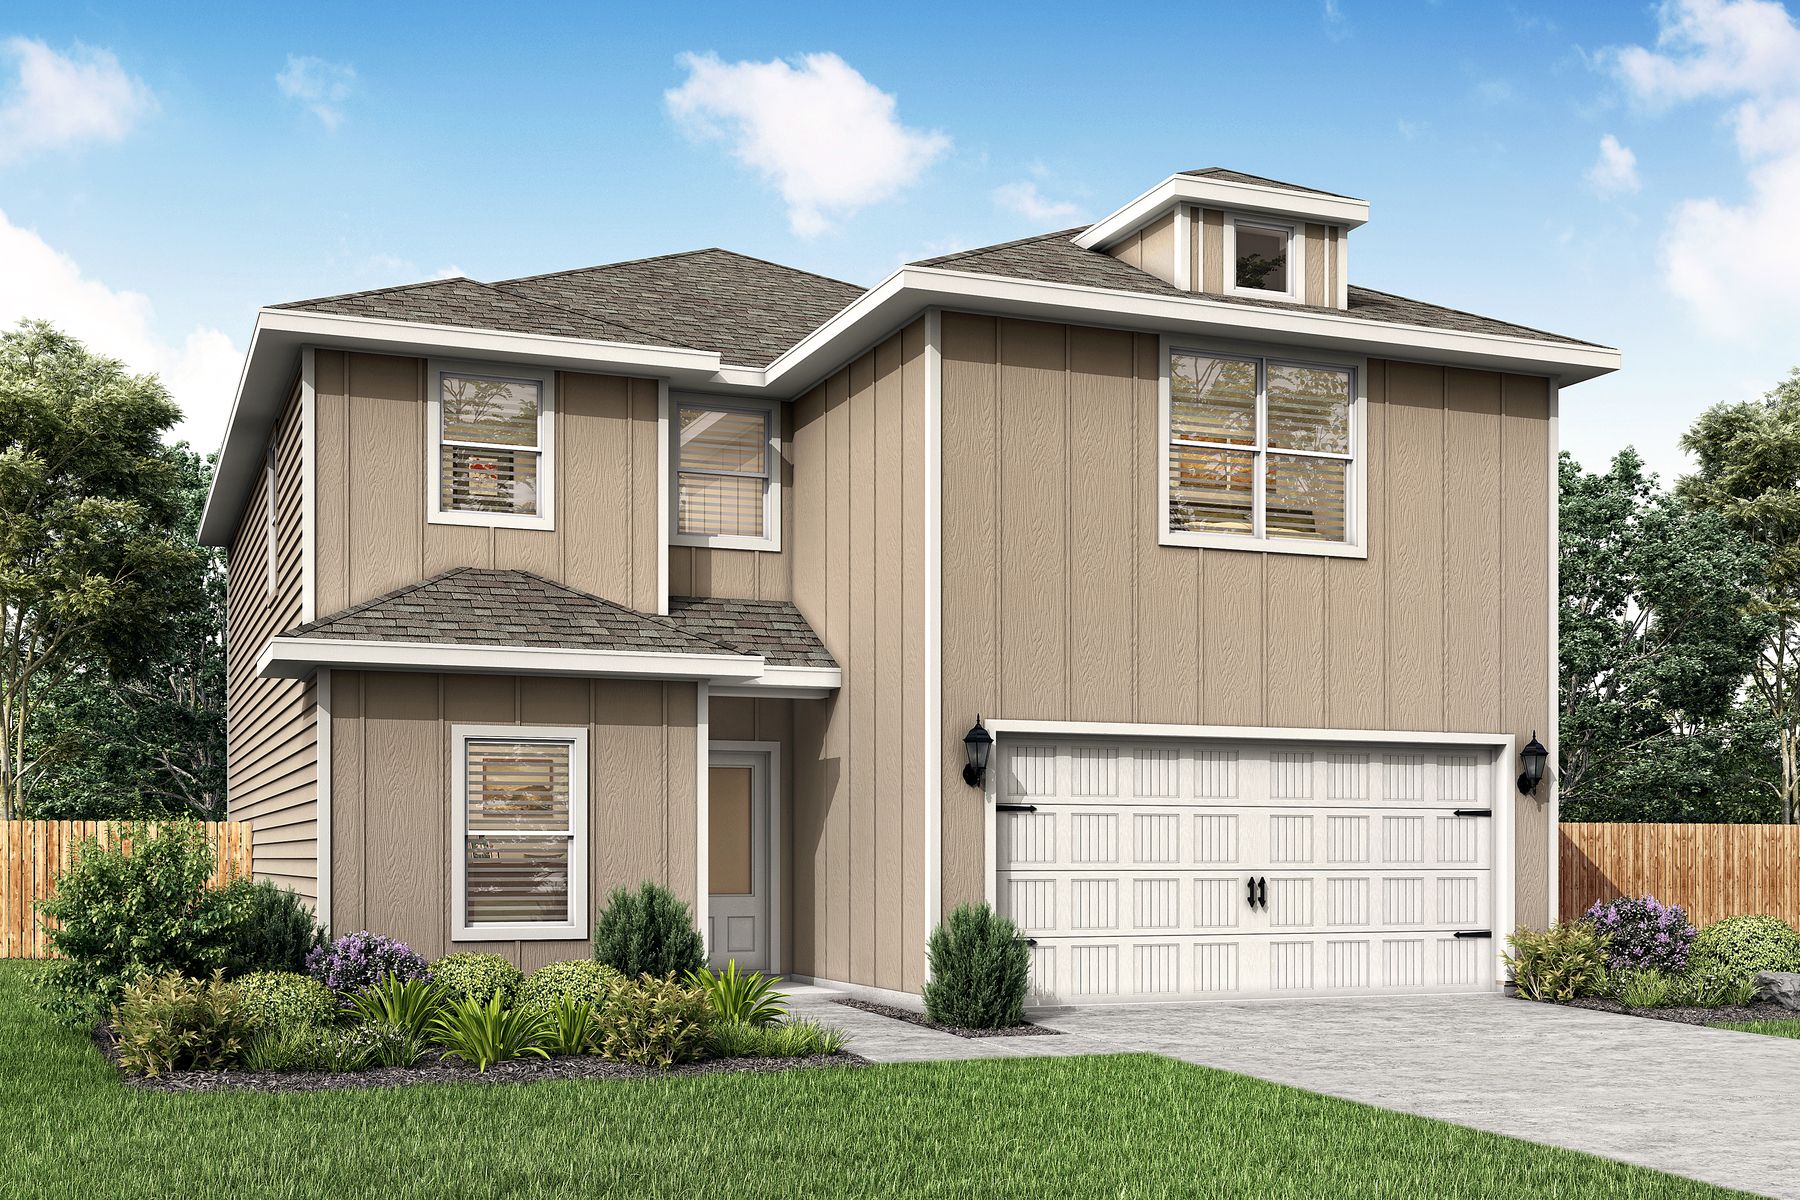 The Driftwood by LGI Homes:A dream home with an upstairs game room!